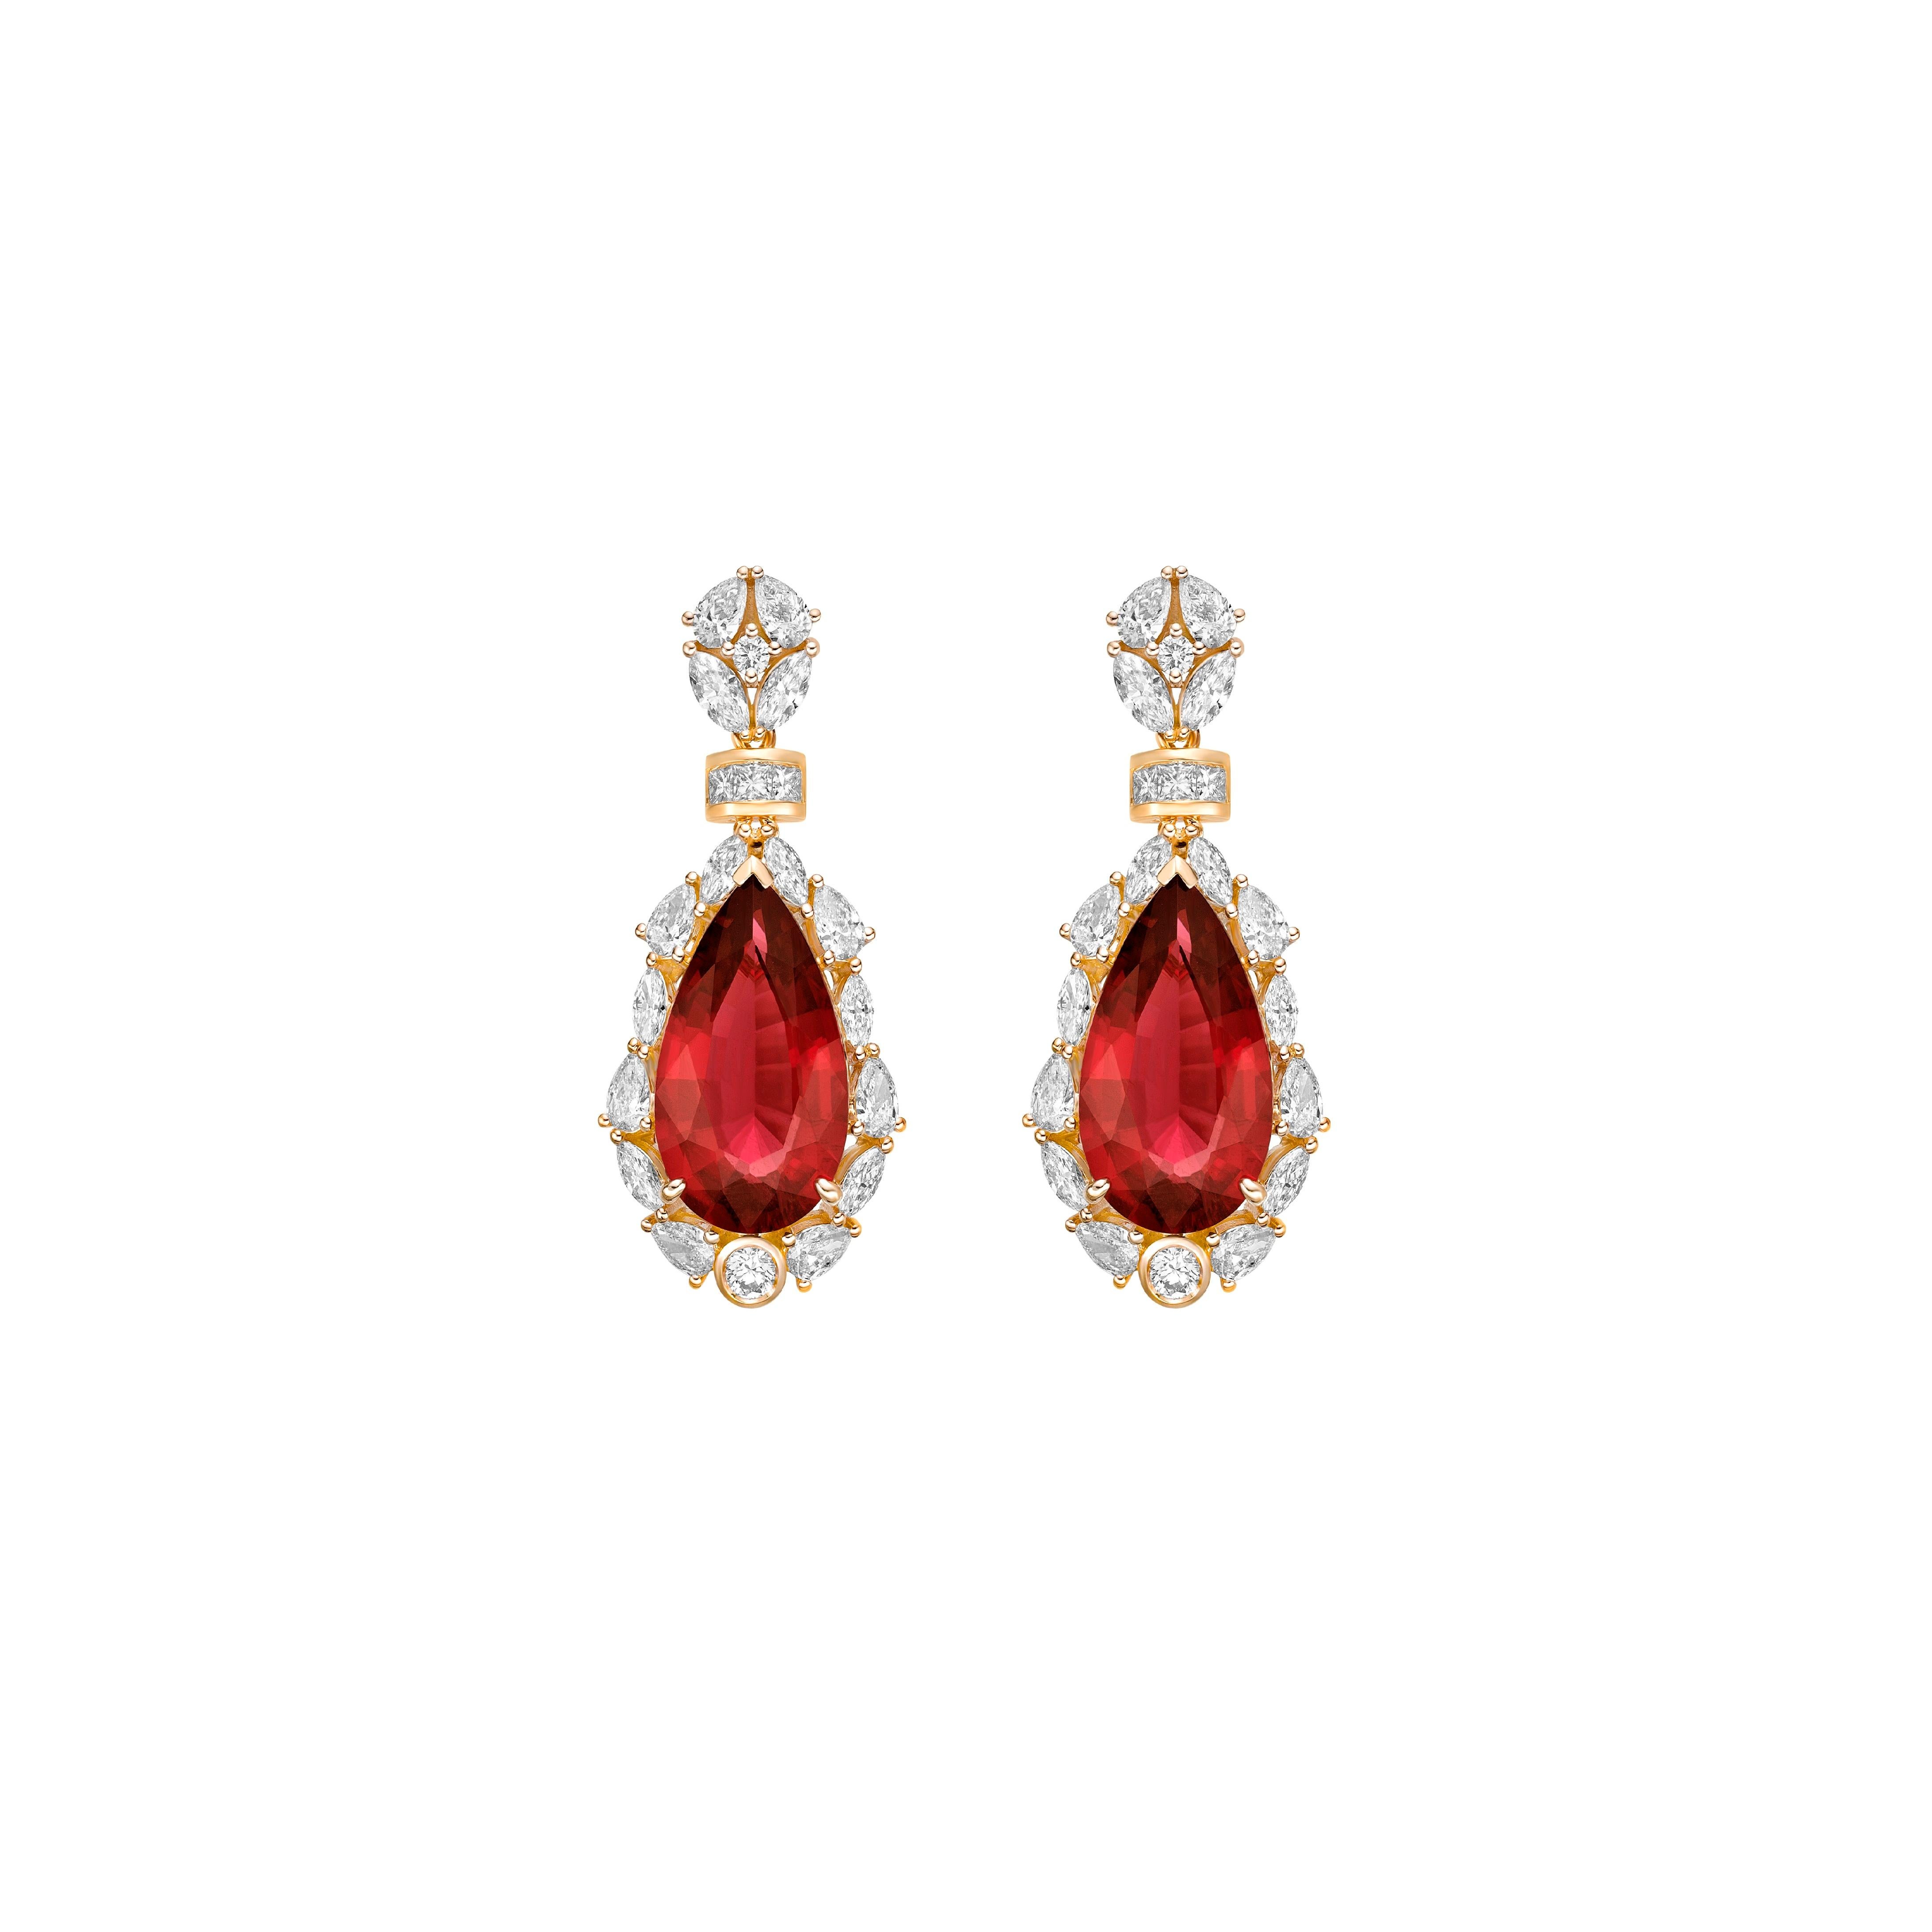 Contemporary 13.842 Carat Rubellite Drop Earrings in 18Karat Yellow Gold with White Diamond. For Sale